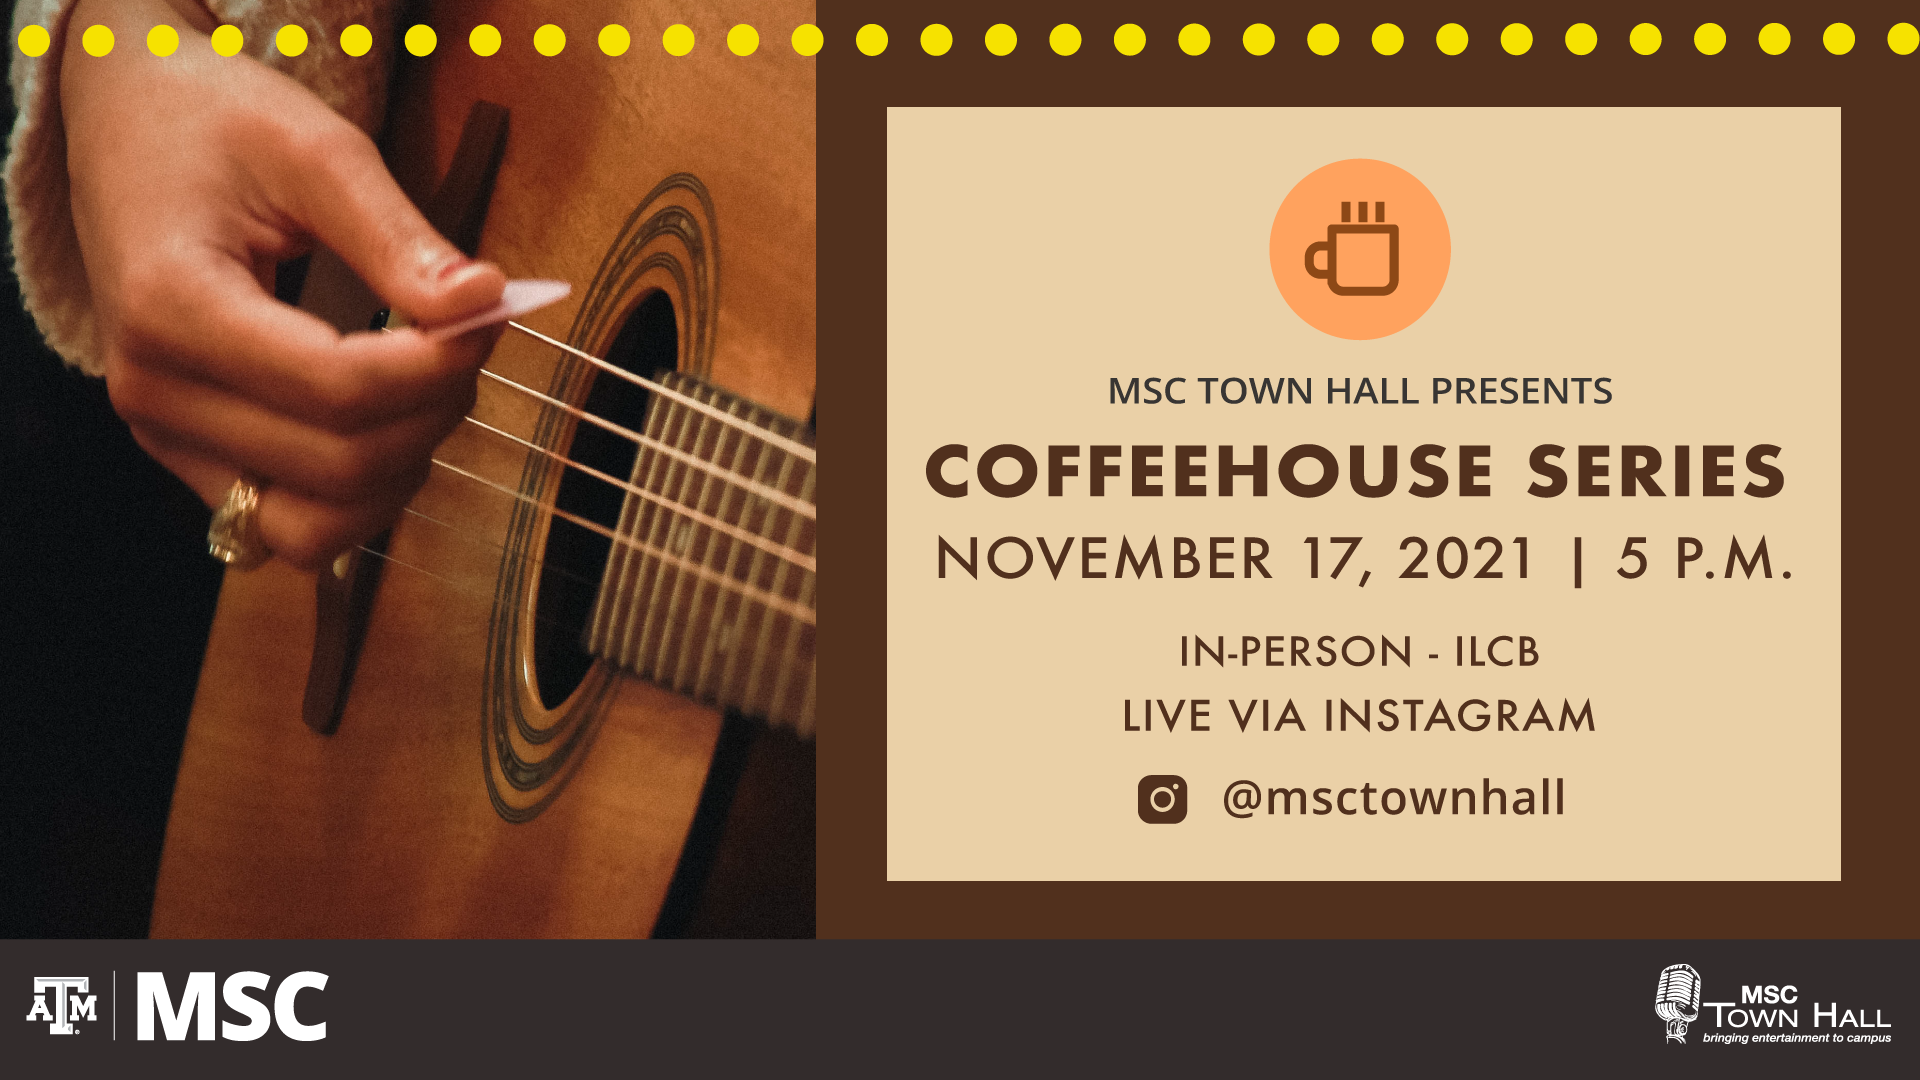 MSC Town Hall Presents Coffeehouse Series. November 17, 2021 at 5 p.m. In person at ILCB Live via Instagram @msctownhall